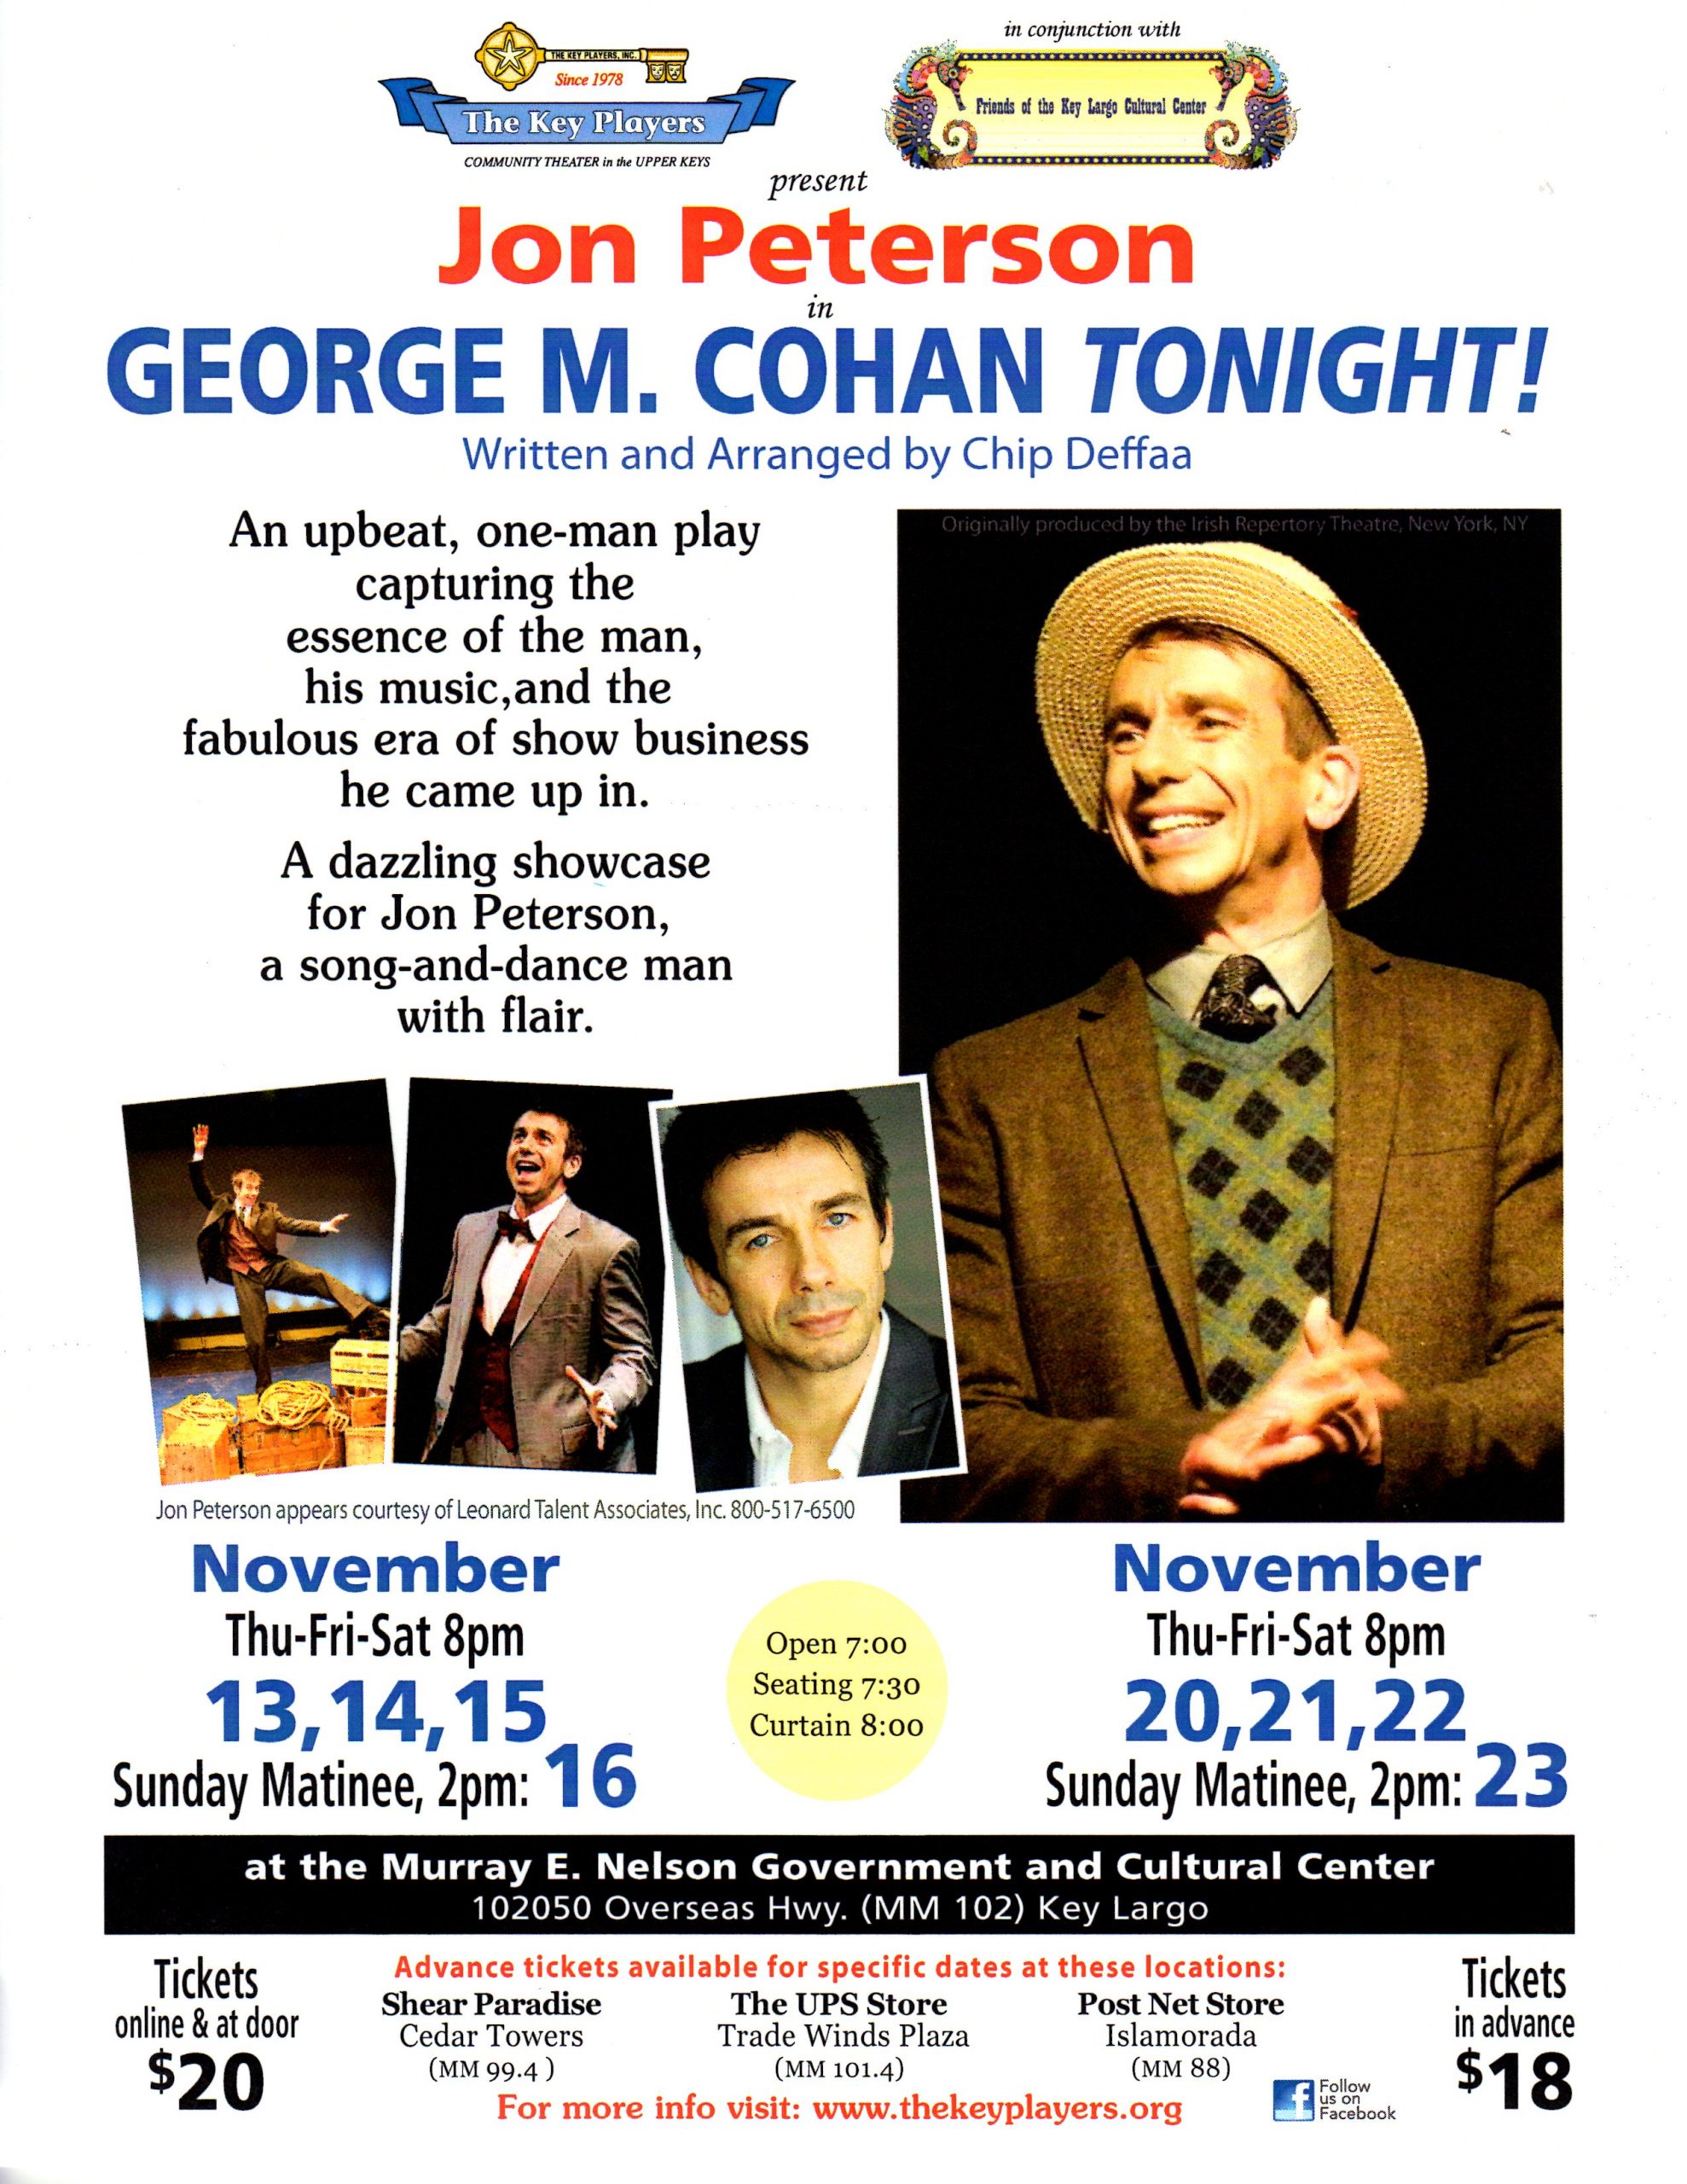 George M. Cohan Tonight show poster